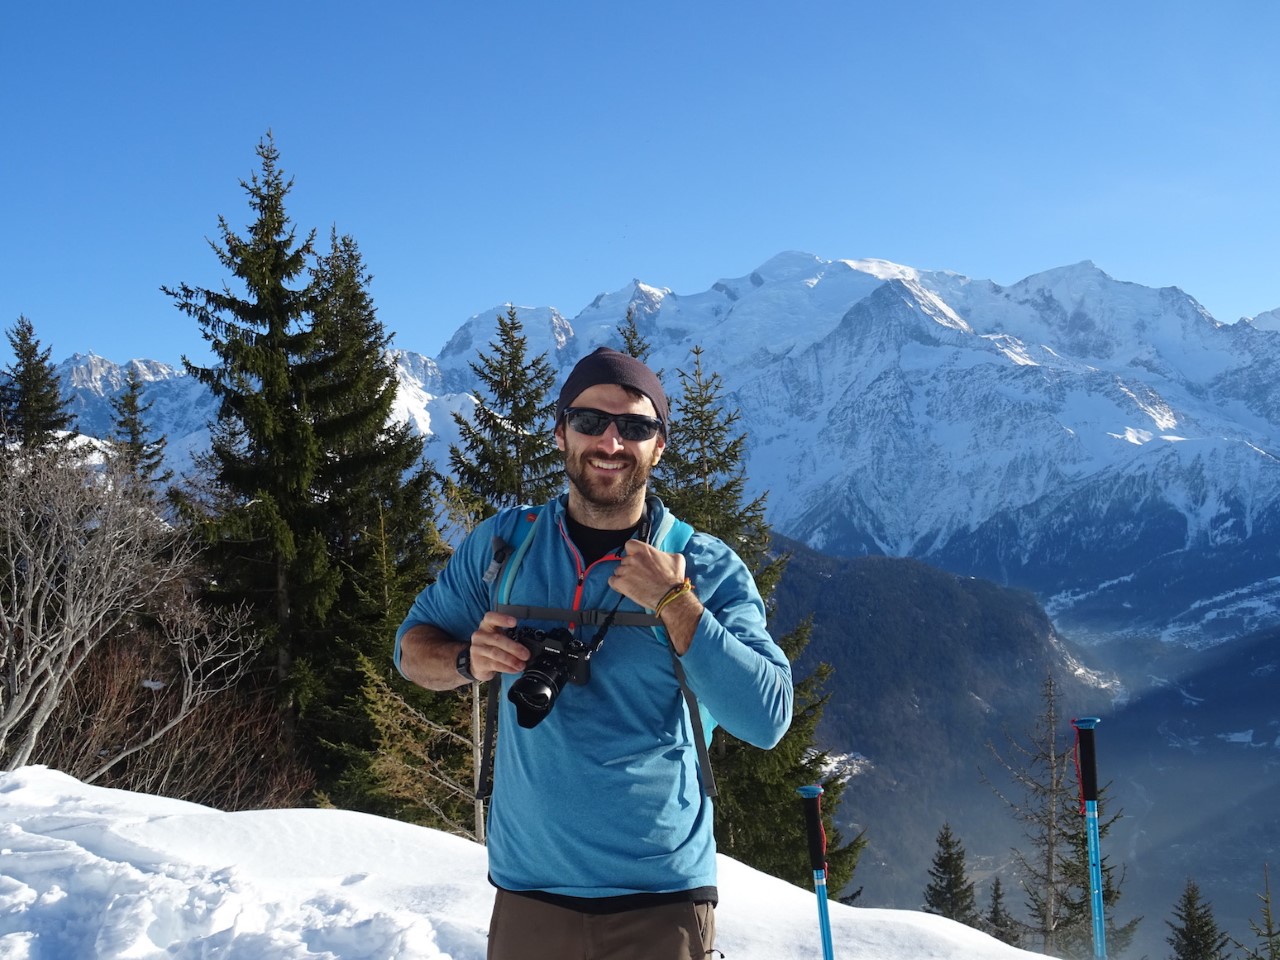 Josh stands on the side of a snowy mountain, with pine trees behind him and a clear view of a neighbouring peak. The sky is bright blue and it matches the colour of Josh's blue fleece. 